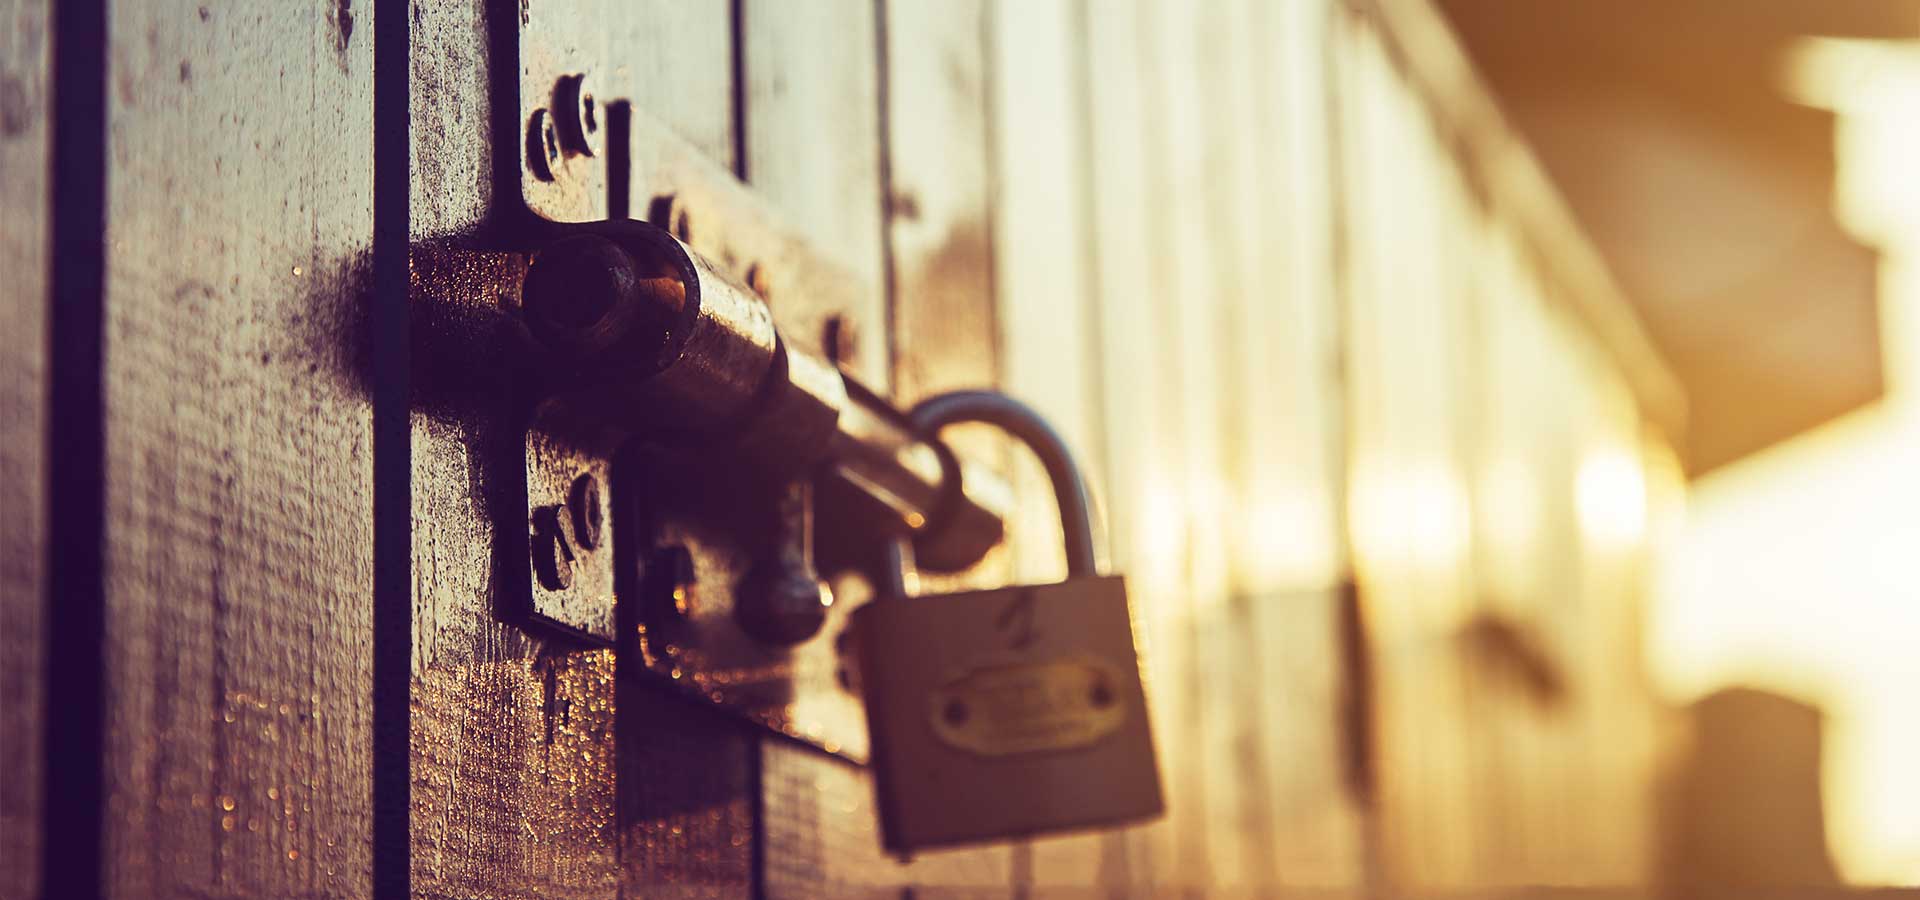 Image of a door with a padlock